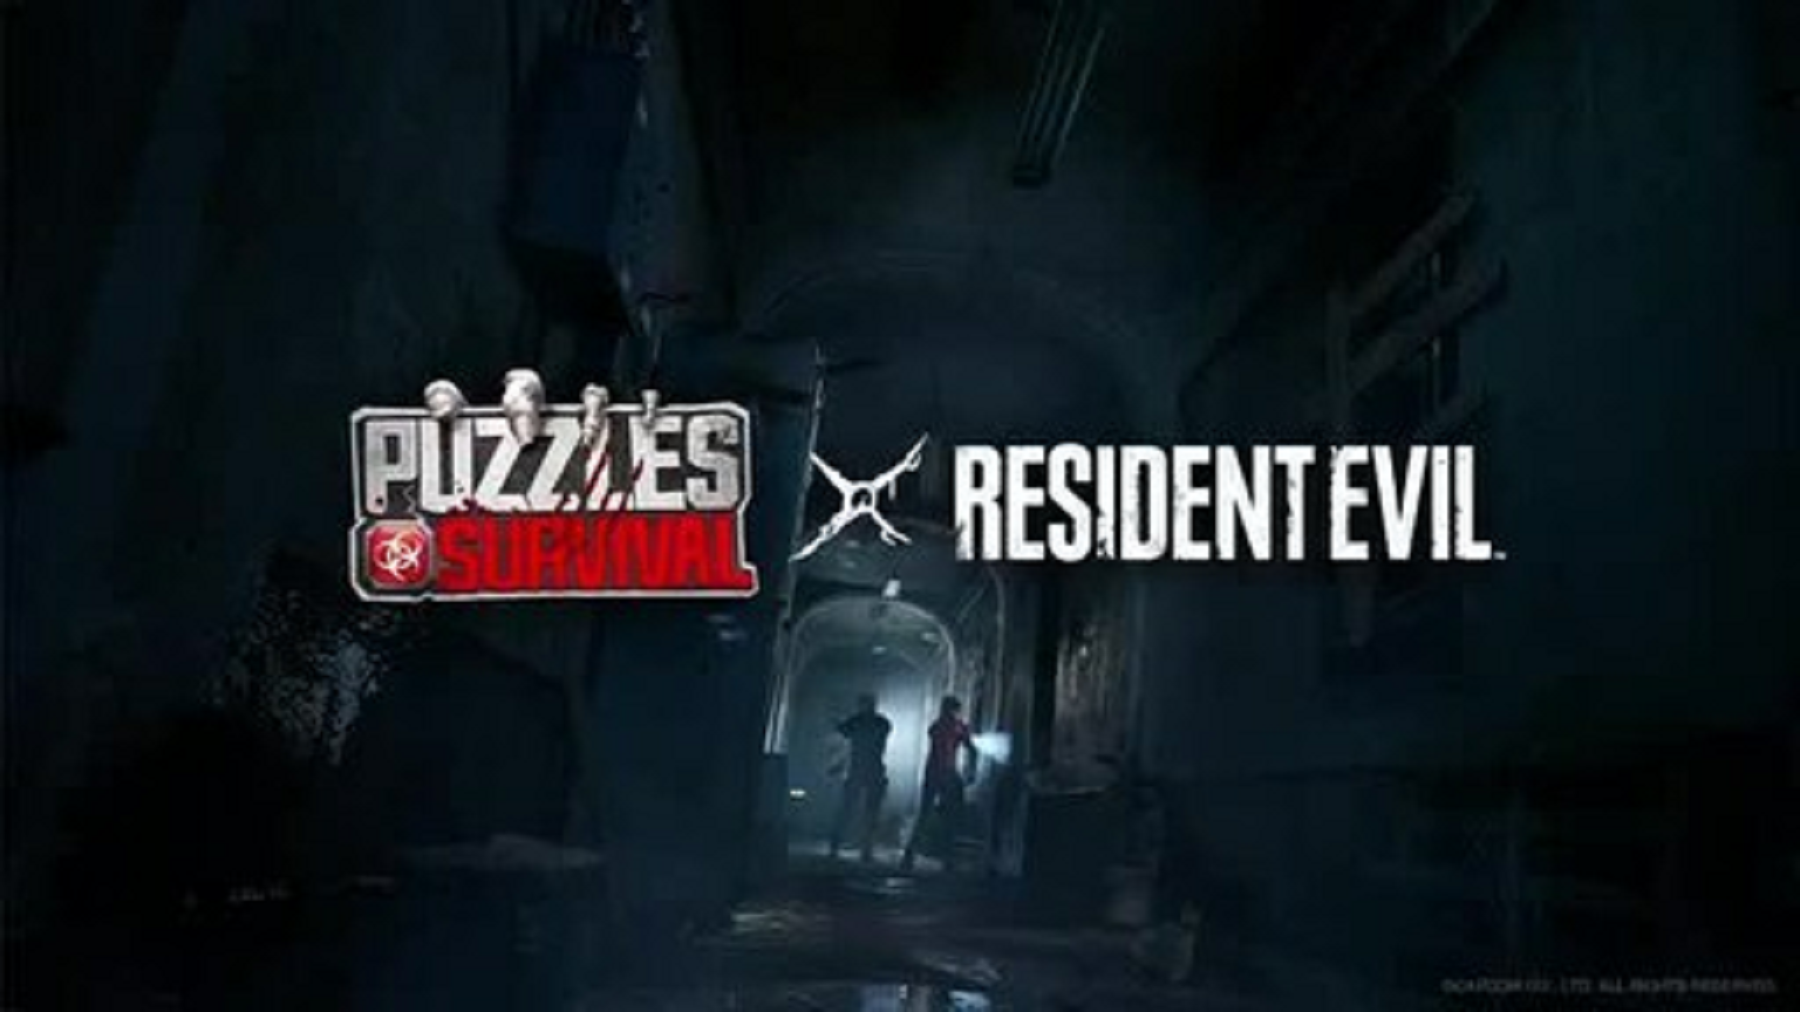 The Puzzles & Survival x Resident Evil Collaboration Starts Today